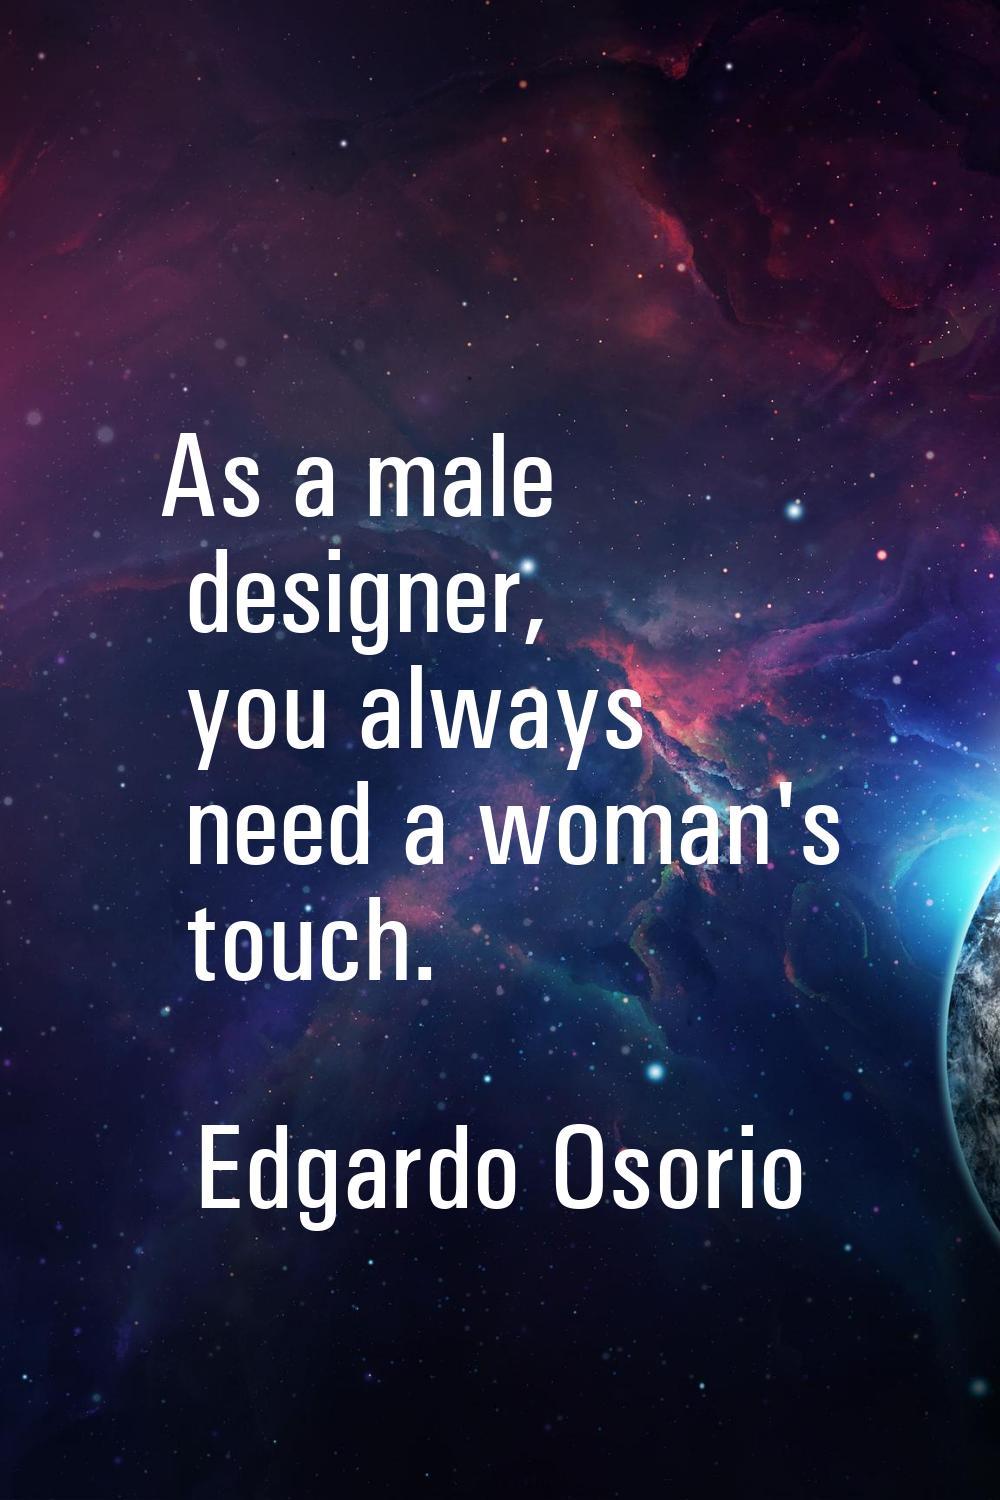 As a male designer, you always need a woman's touch.